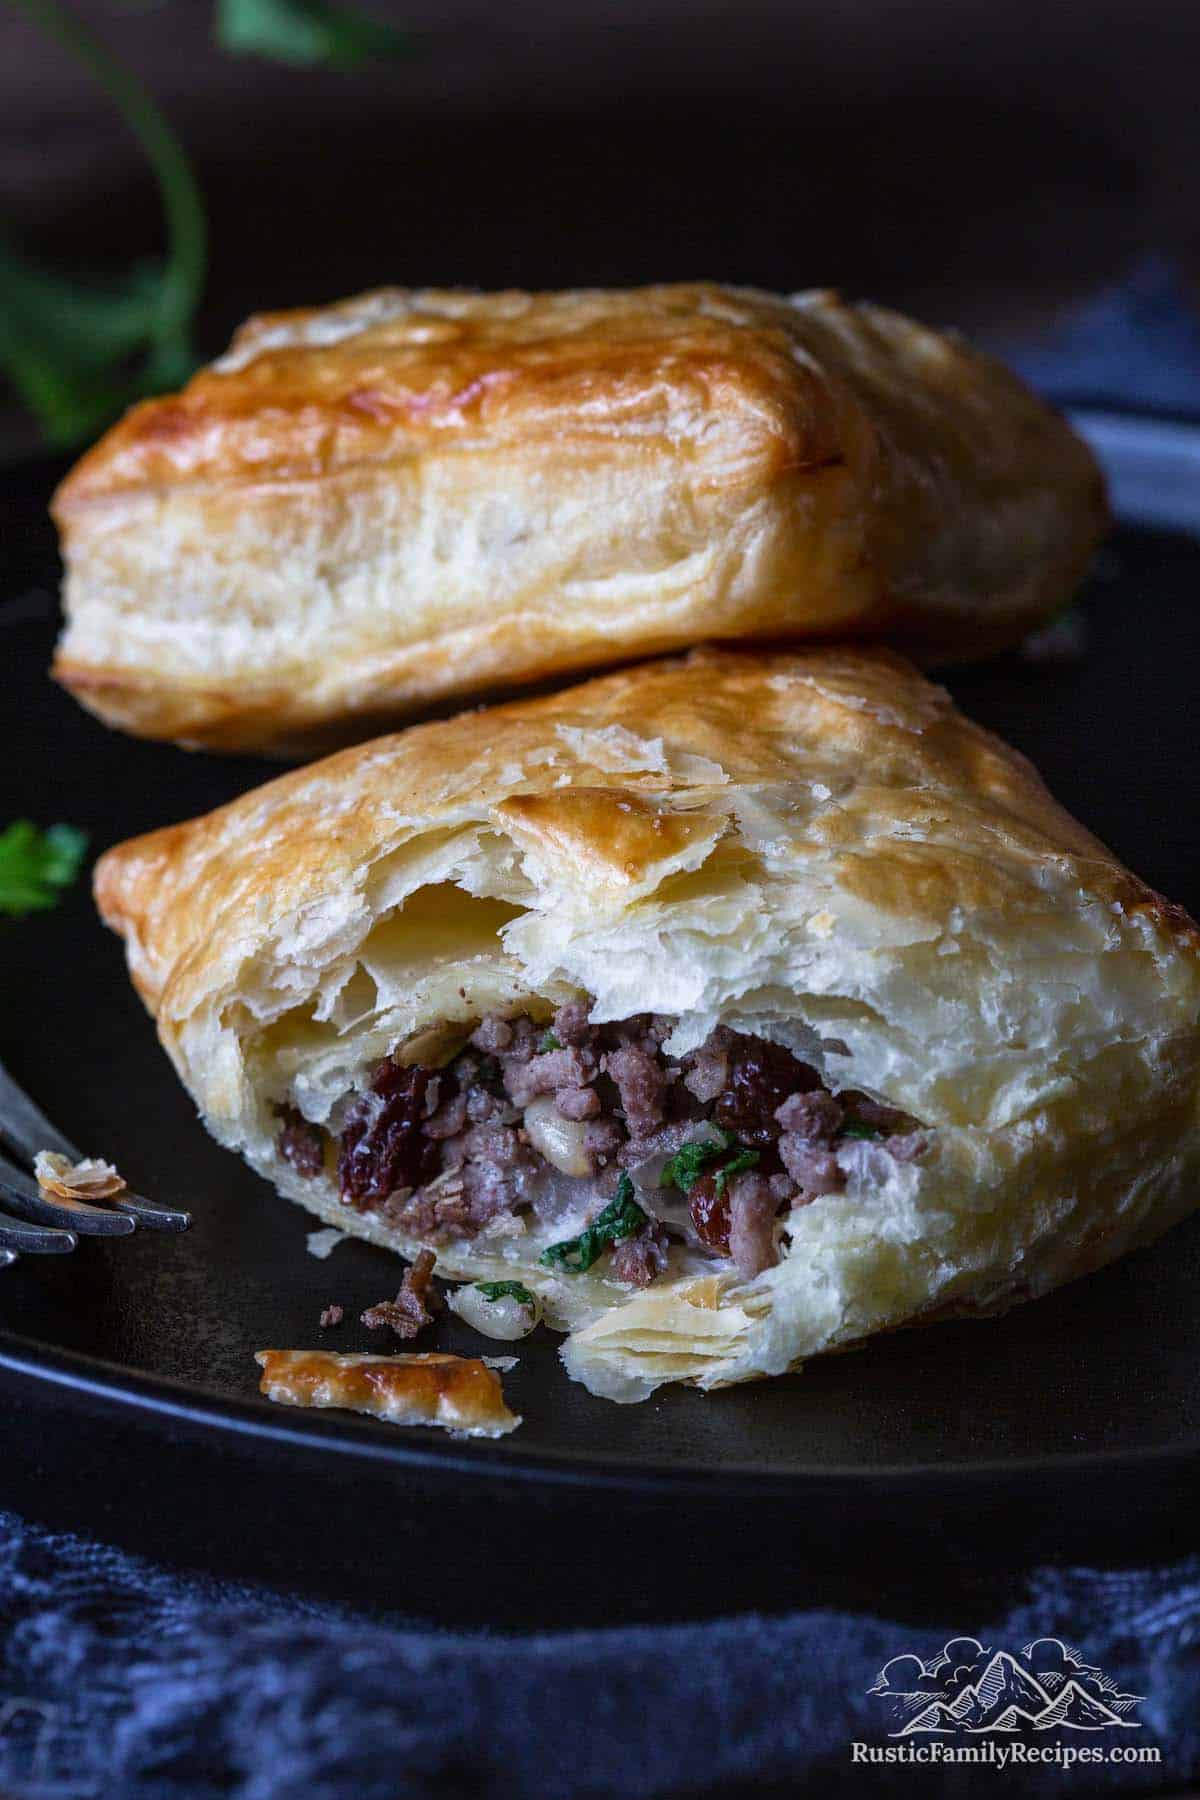 Close up of the ground venison filling inside a flaky homemade meat pie.